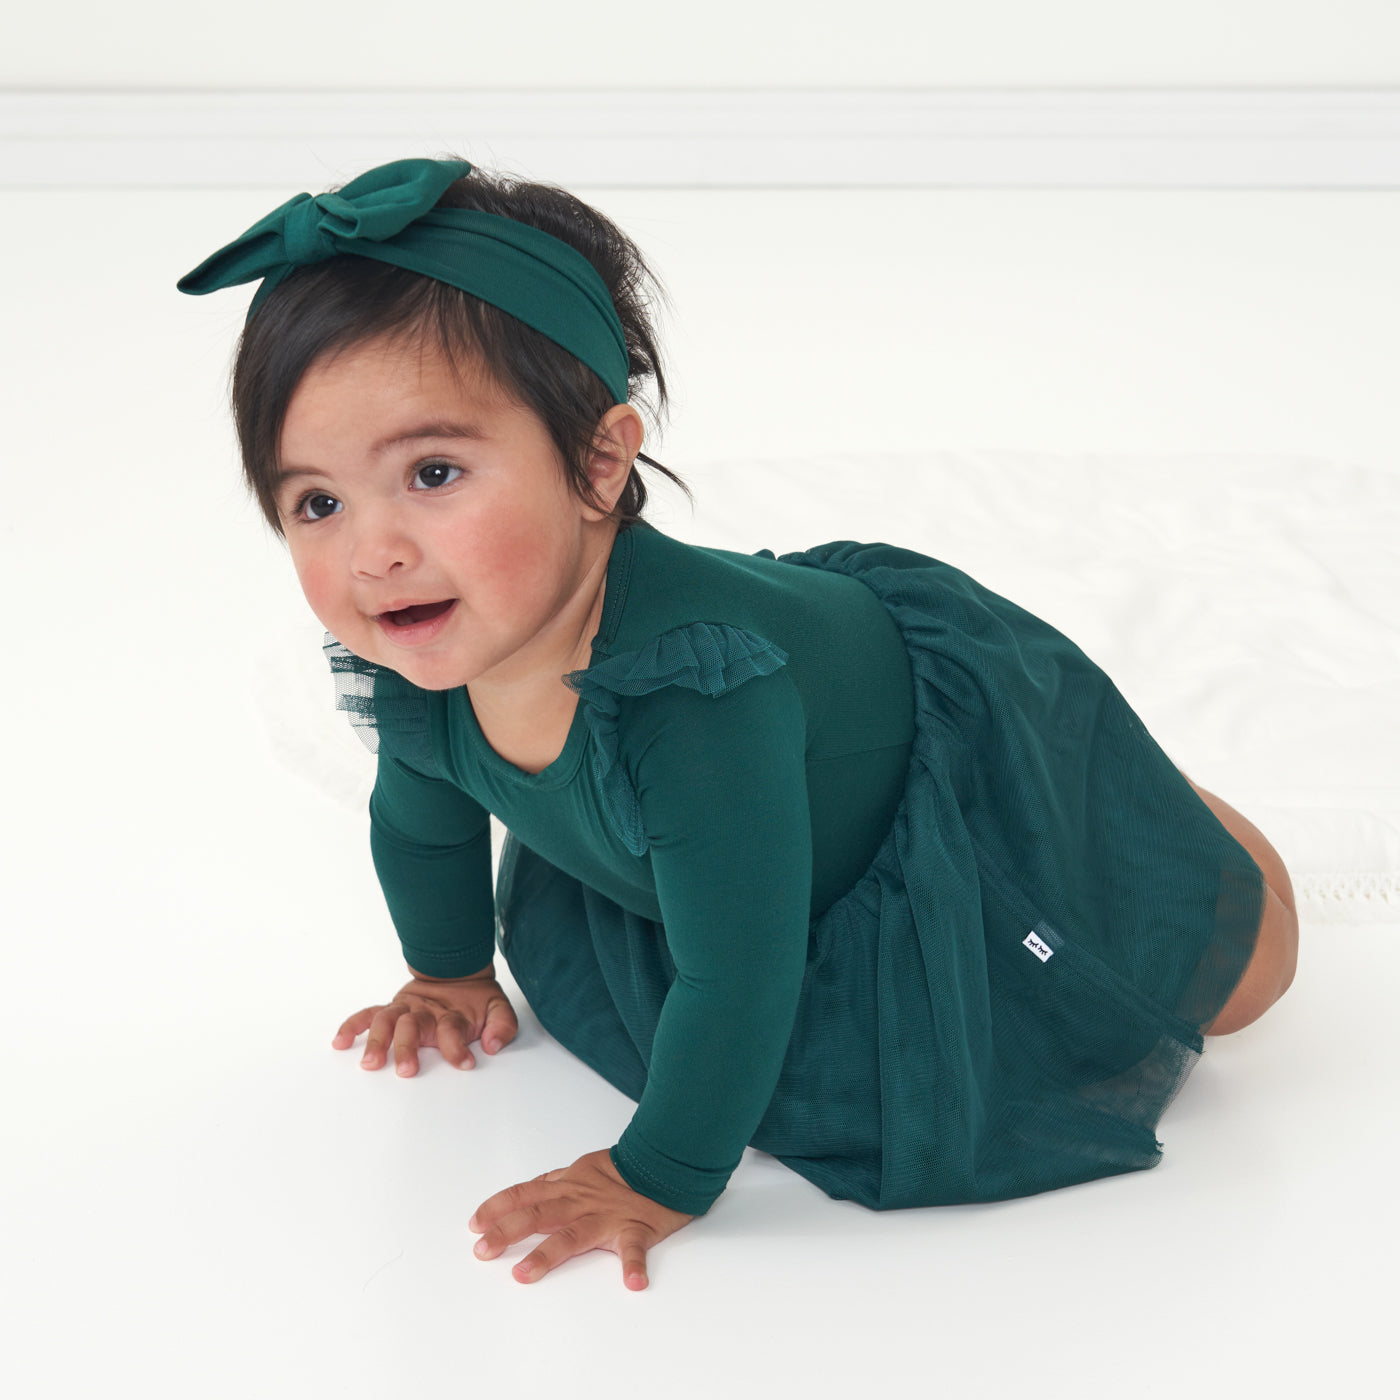 Child crawling wearing an Emerald flutter tutu dress with bloomer paired with an Emerald luxe bow headband